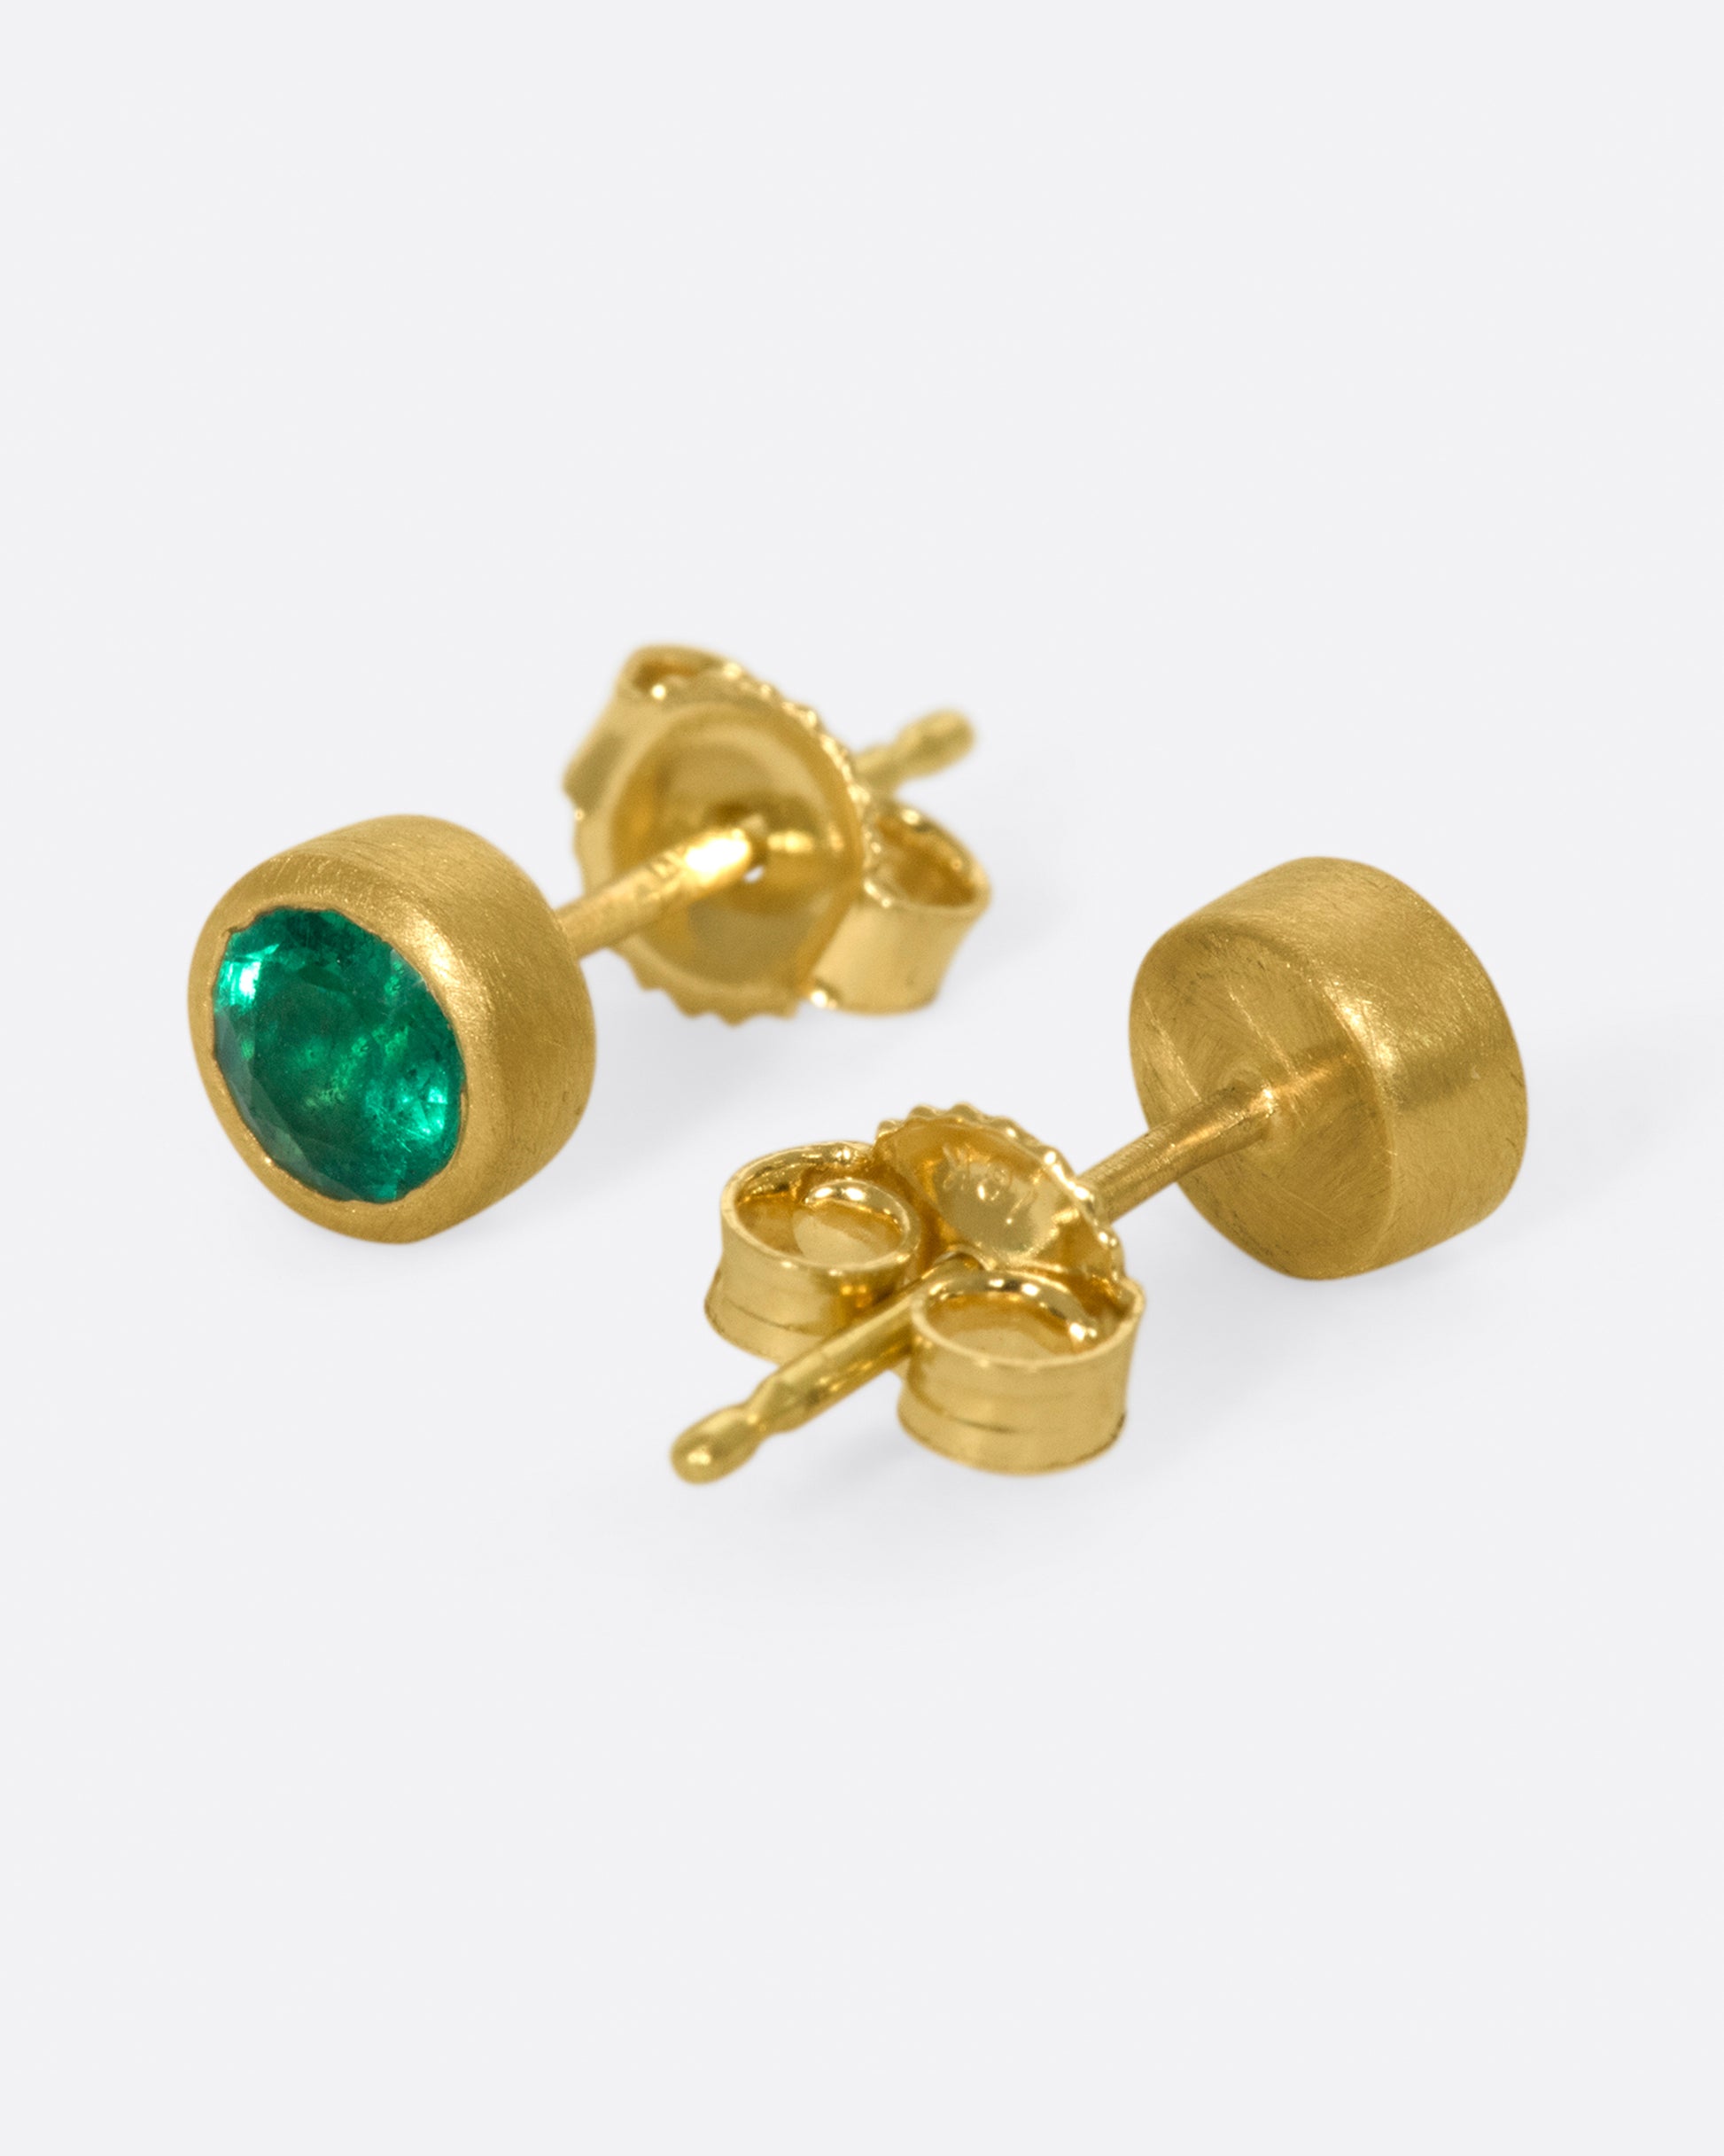 A pair of classic, solitaire earrings with vibrant emeralds set in matte gold bezels.